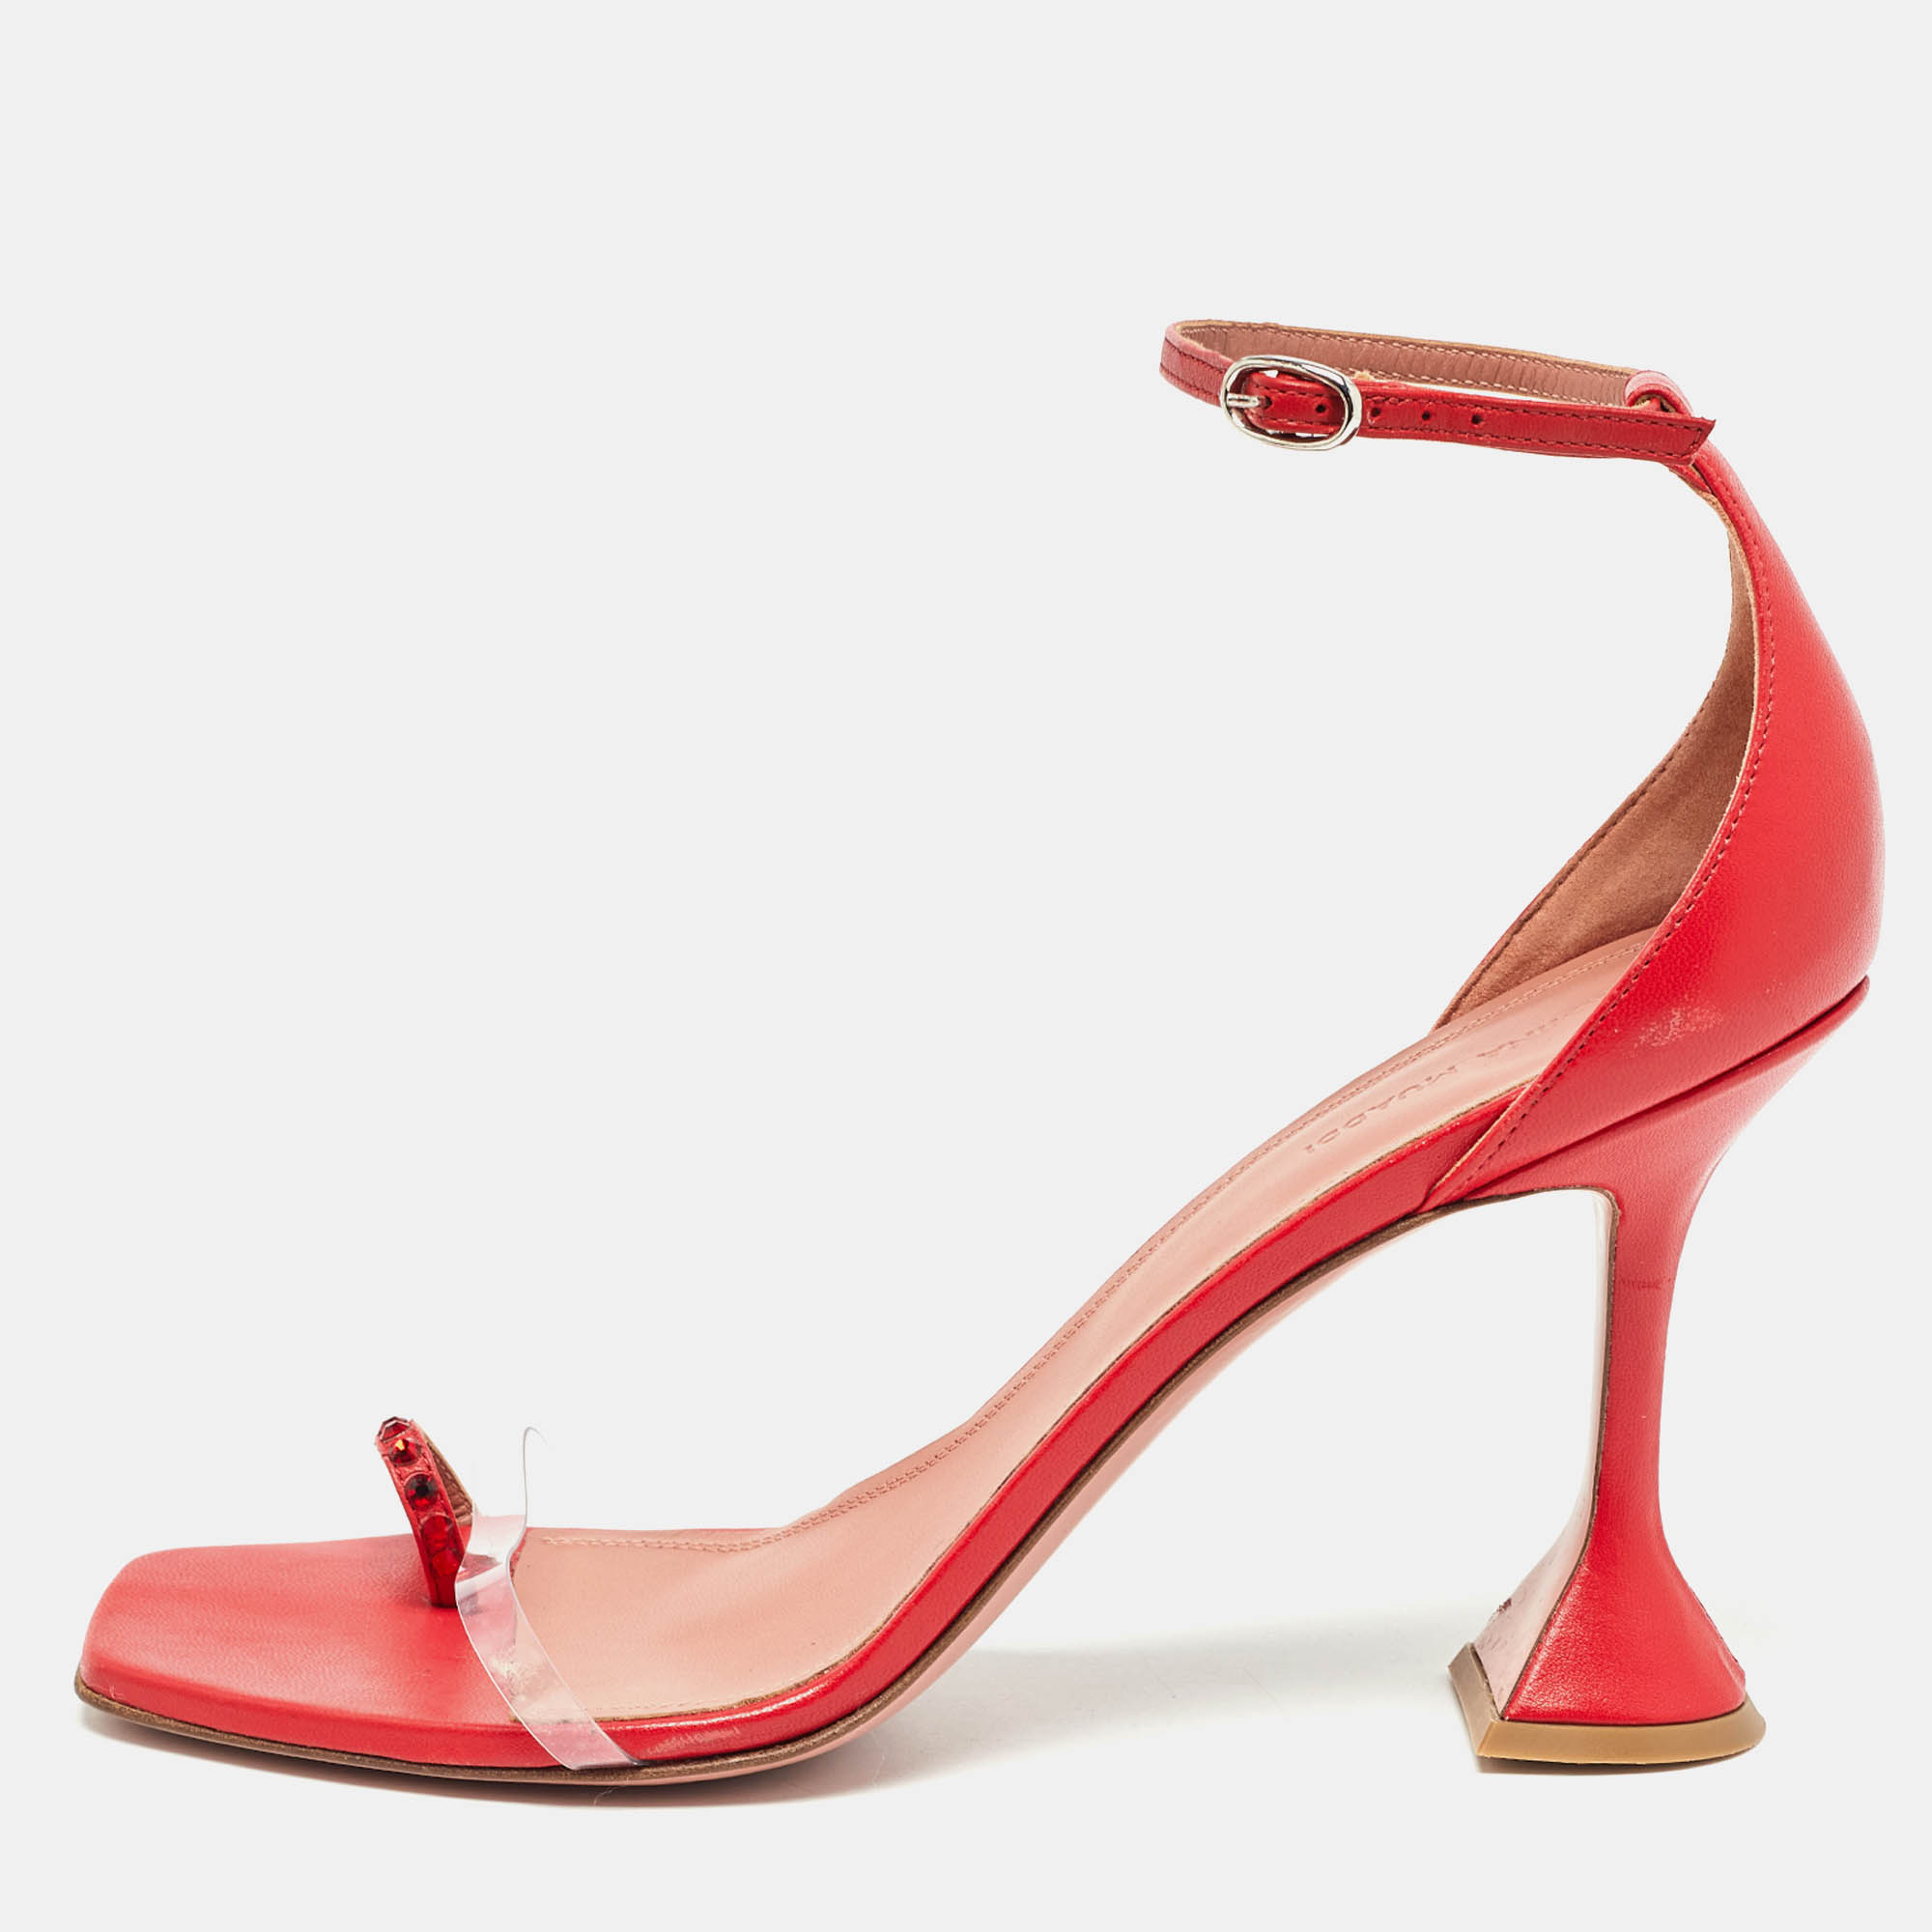 Amina muaddi red leather daisy ankle strap sandals size 42